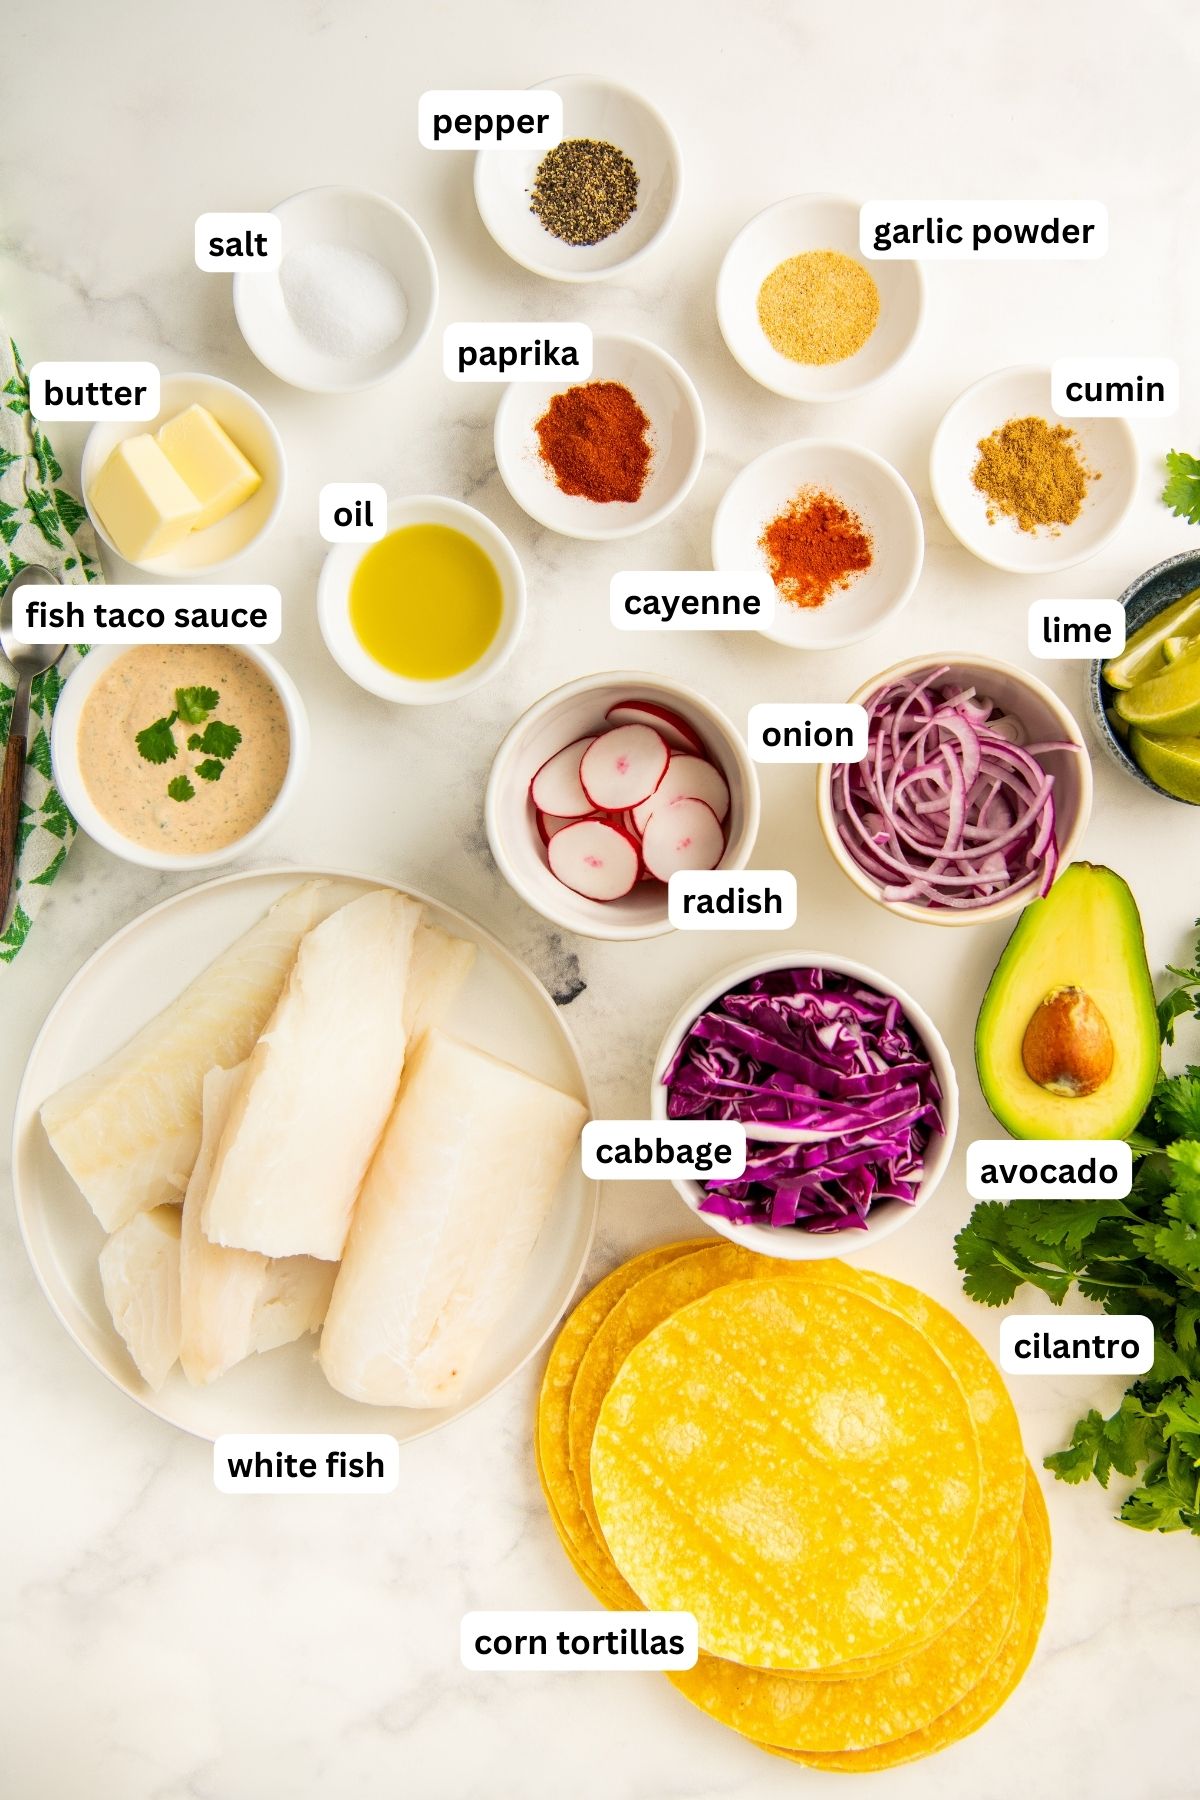 Ingredients for this easy fish tacos recipe arranged in bowls. From top to bottom: pepper, salt, garlic powder, paprika, cumin, cayenne, butter, oil, fish taco sauce, radishes, onion, lime, avocado, cilantro, cabbage, white fish and corn tortillas. 